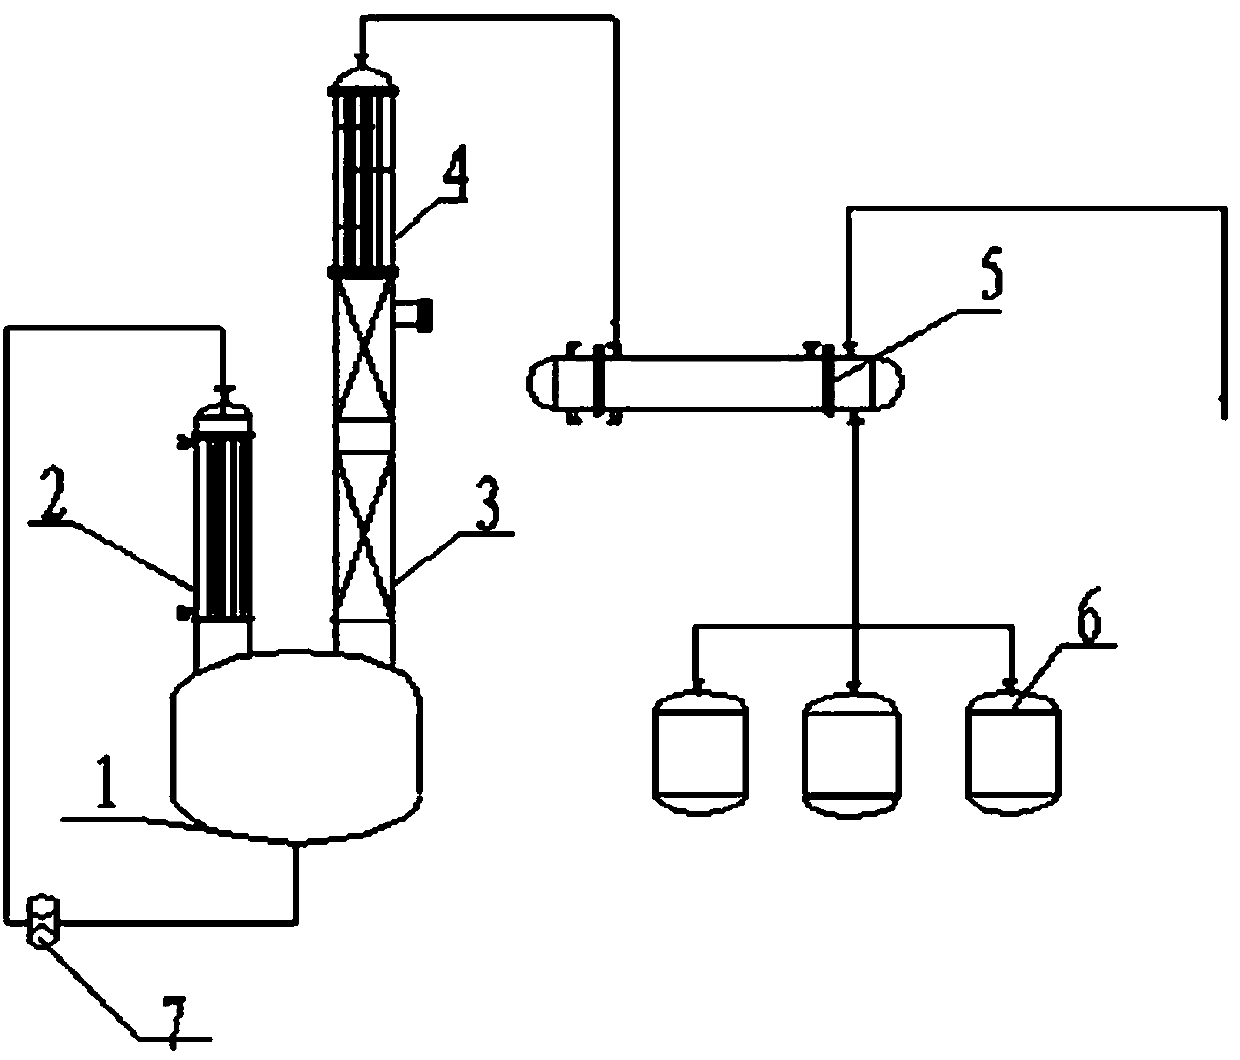 Device and method for purifying delta-decalactone by vacuum batch distillation